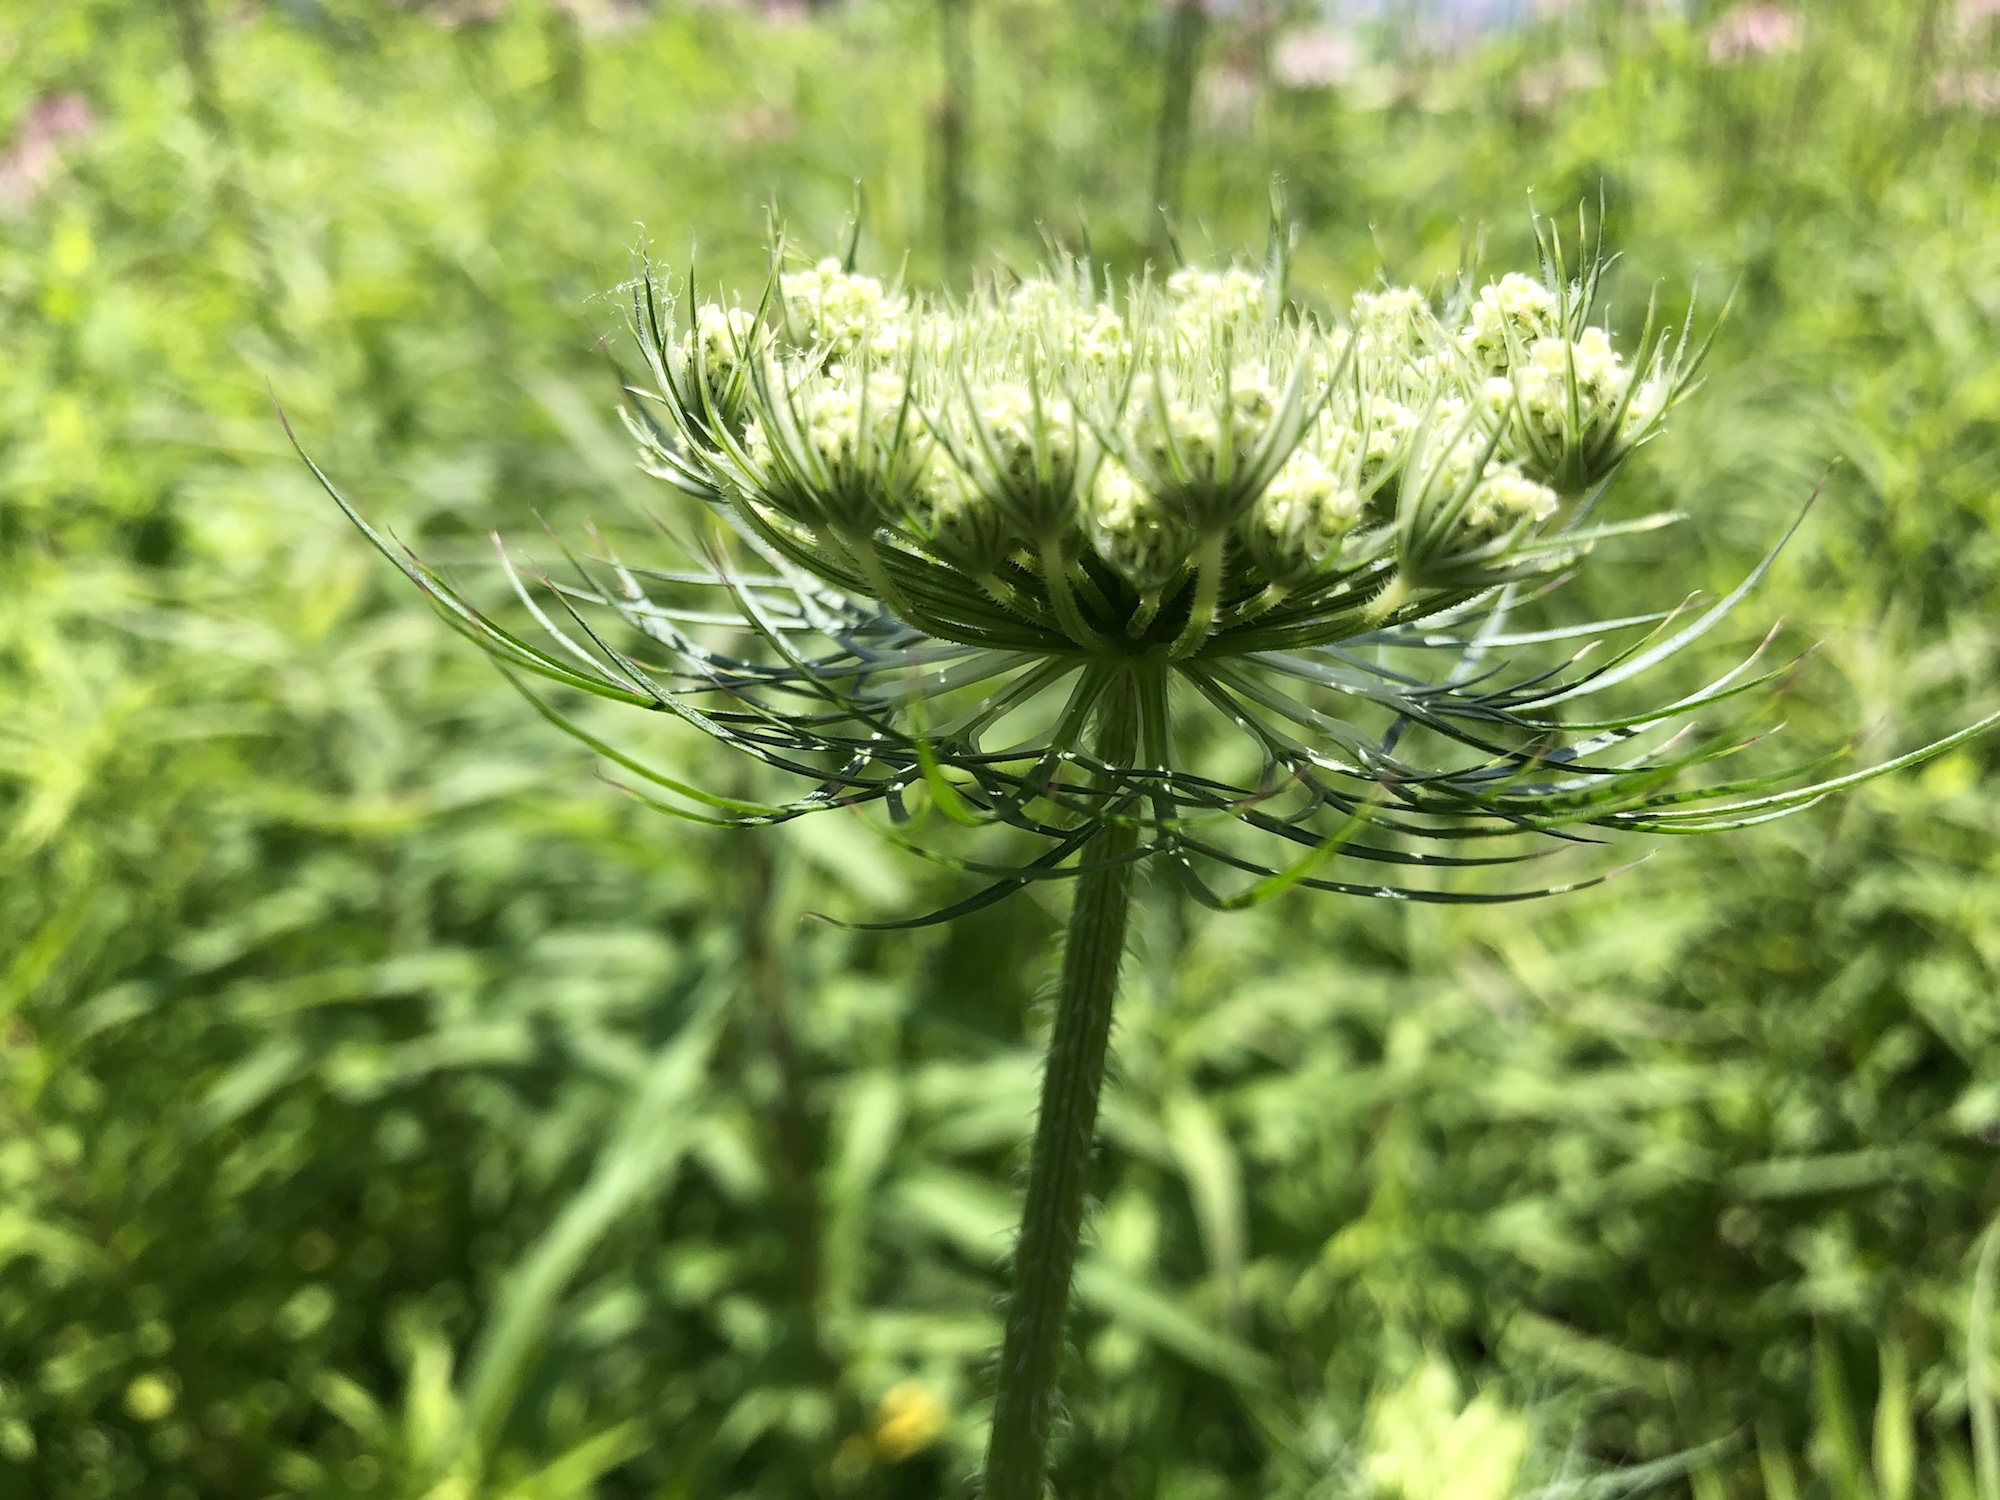 Queen Anne's Lace on bank of retaining pond on the corner of Nakoma Road and Manitou Way in Madison, WI on June 25, 2019.